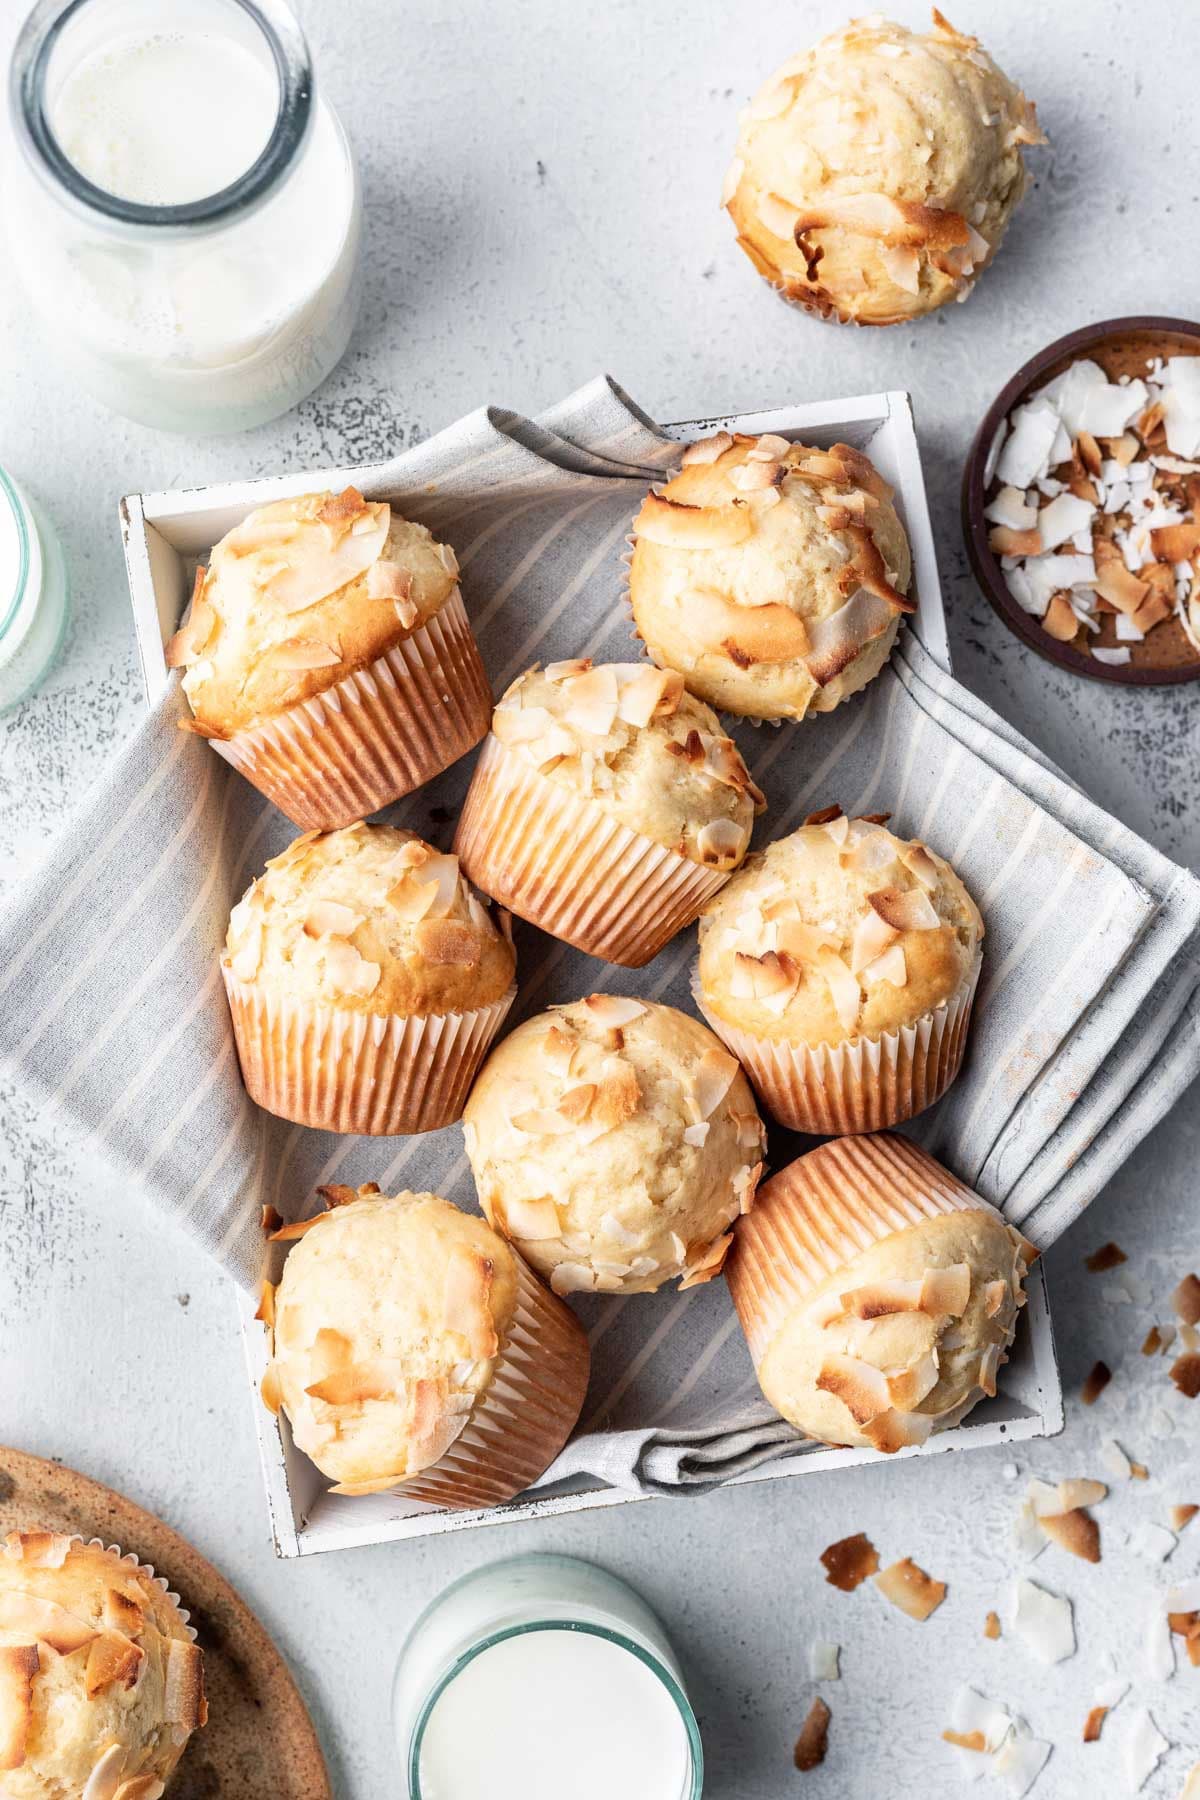 Coconut muffins in a tea towel lined box next to a dish of coconut.